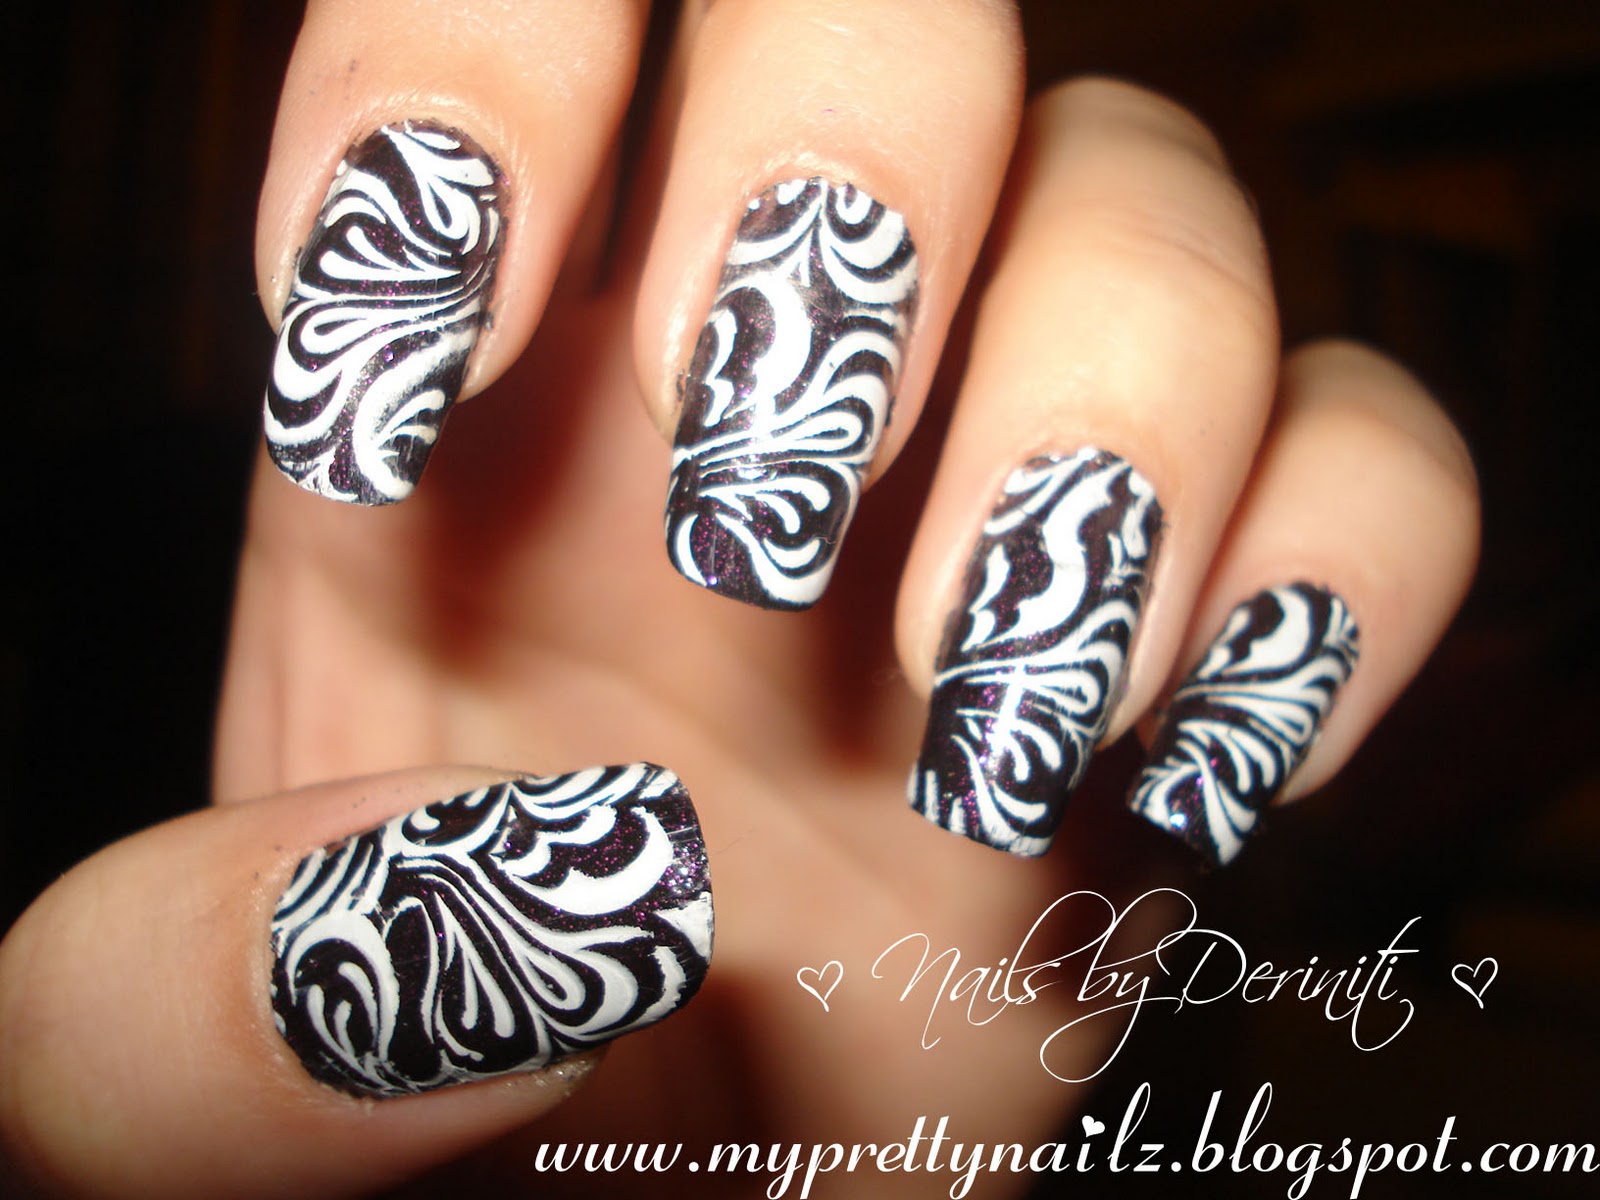 1. Simple Black and White Nail Design - wide 10